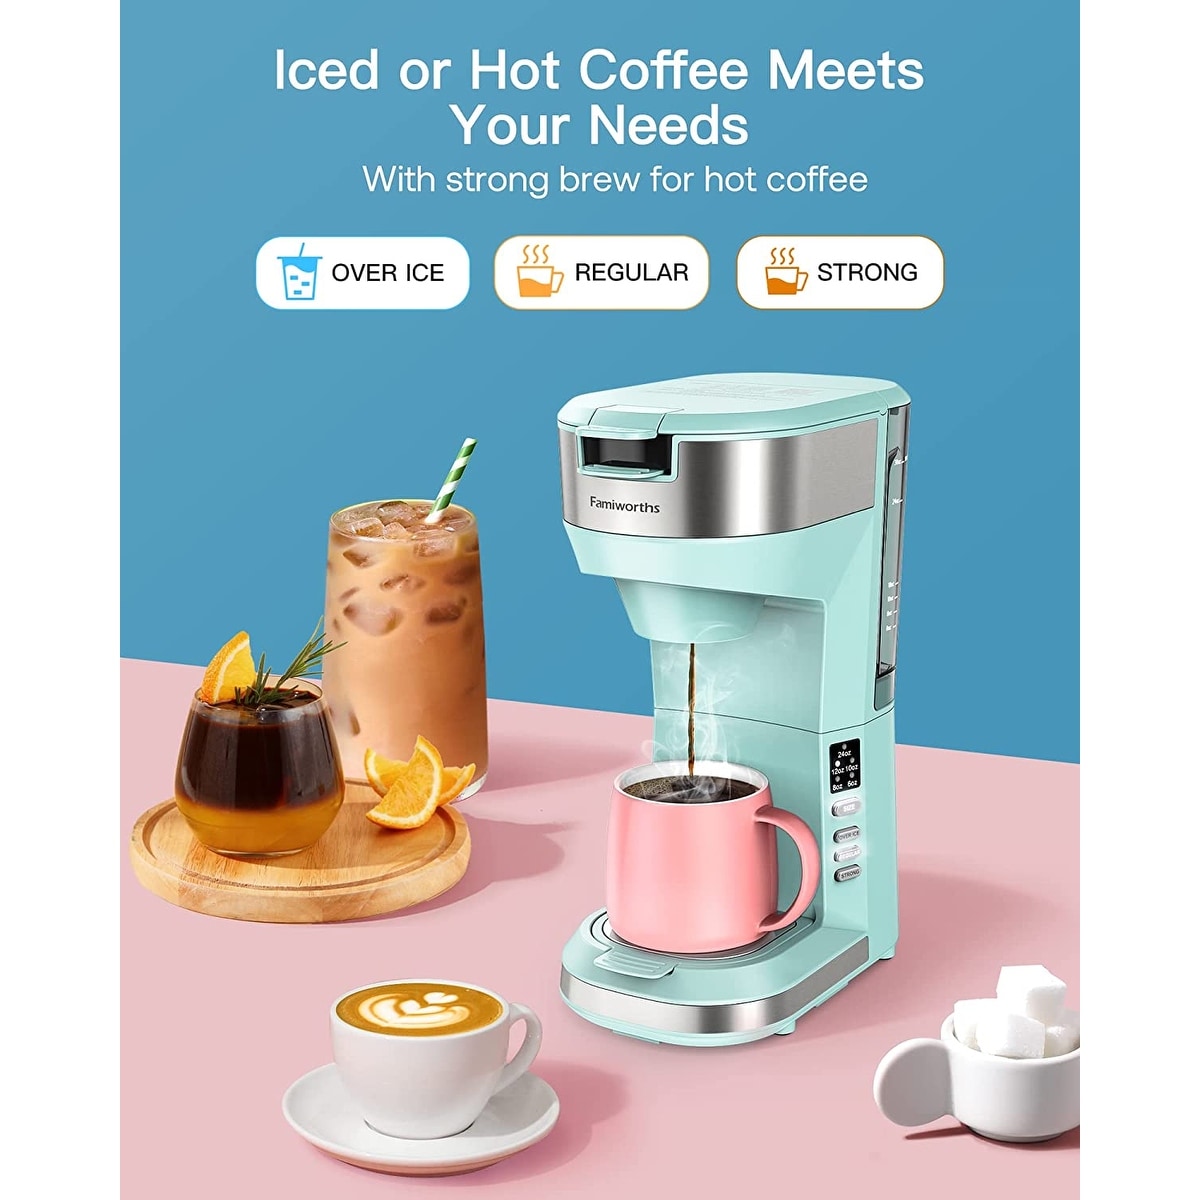 https://ak1.ostkcdn.com/images/products/is/images/direct/577b961d269f3b270ad5dbc692629edc2039da53/Hot-and-Iced-Coffee-Maker-for-K-Cups-and-Ground-Coffee%2C-4-5-Cups-Coffee-Maker-and-Single-serve-Brewers.jpg